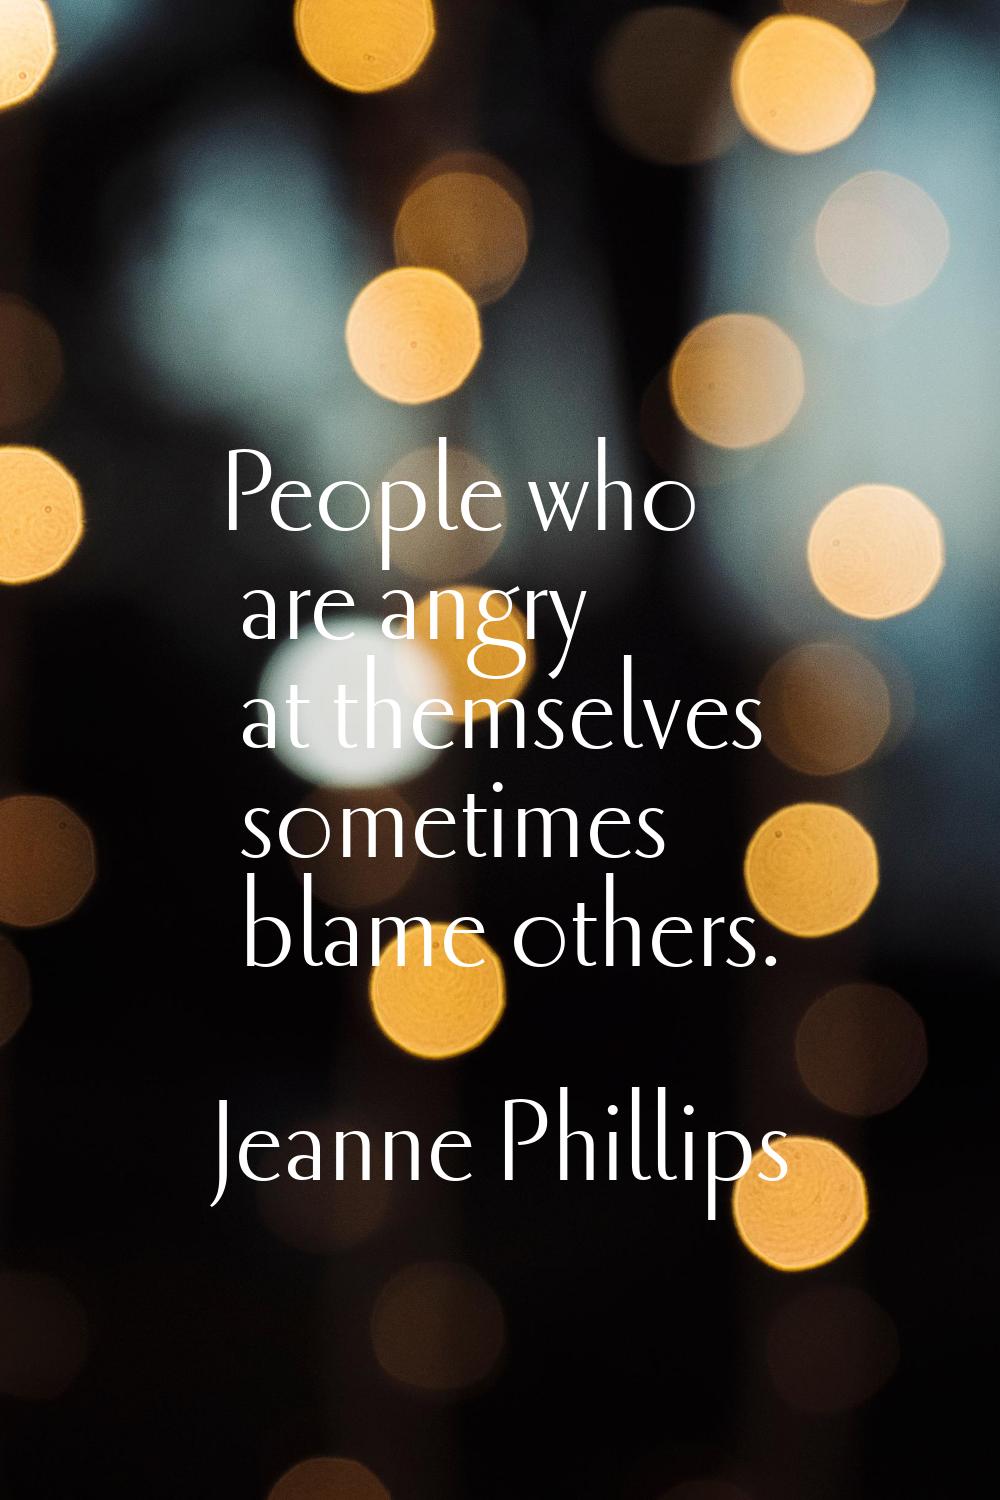 People who are angry at themselves sometimes blame others.